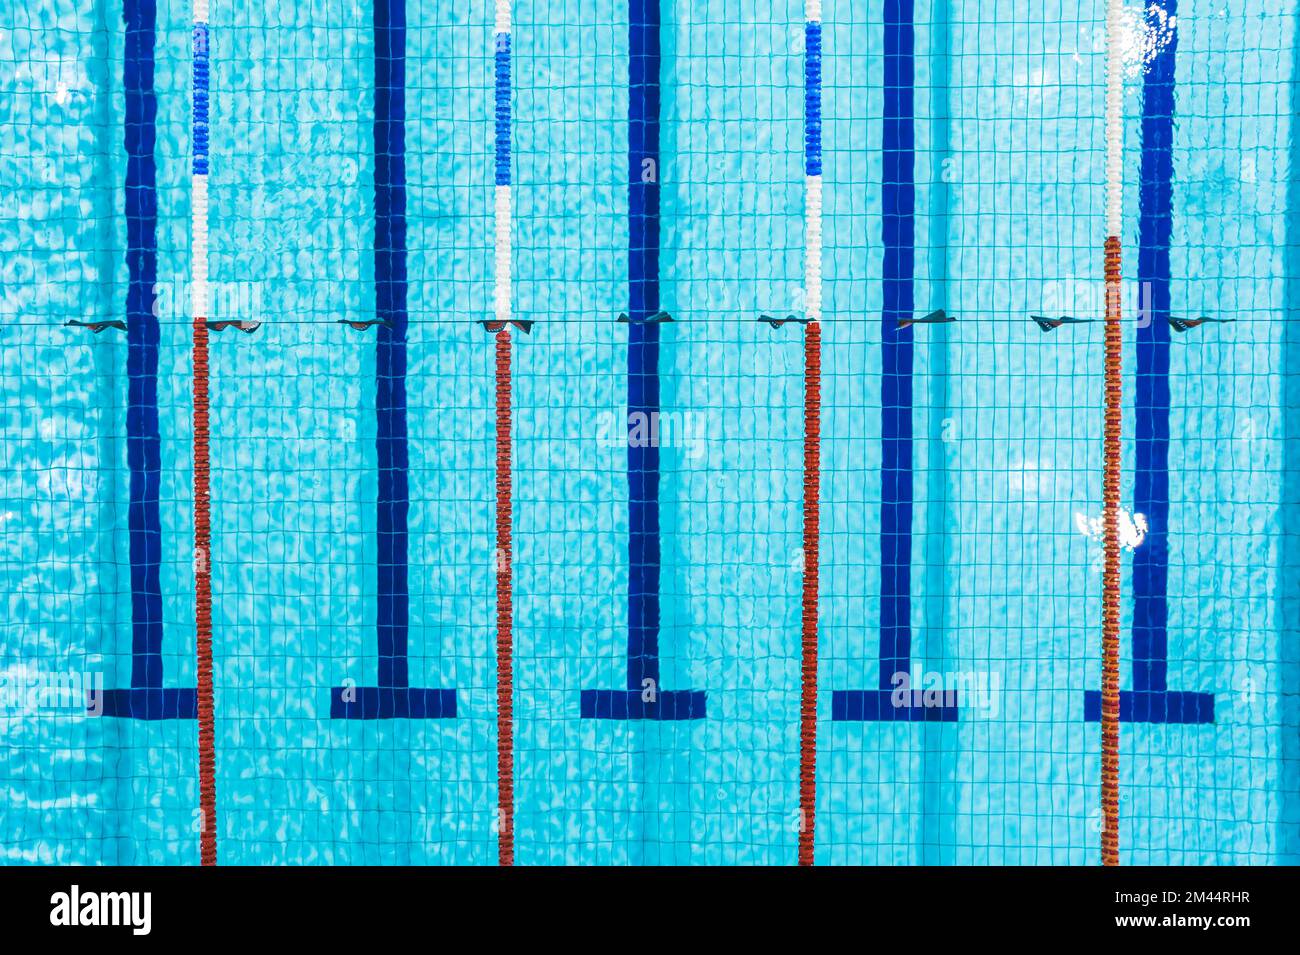 Aerial view of an empty swimming pool with five lanes divided with lane ropes. High quality photo Stock Photo